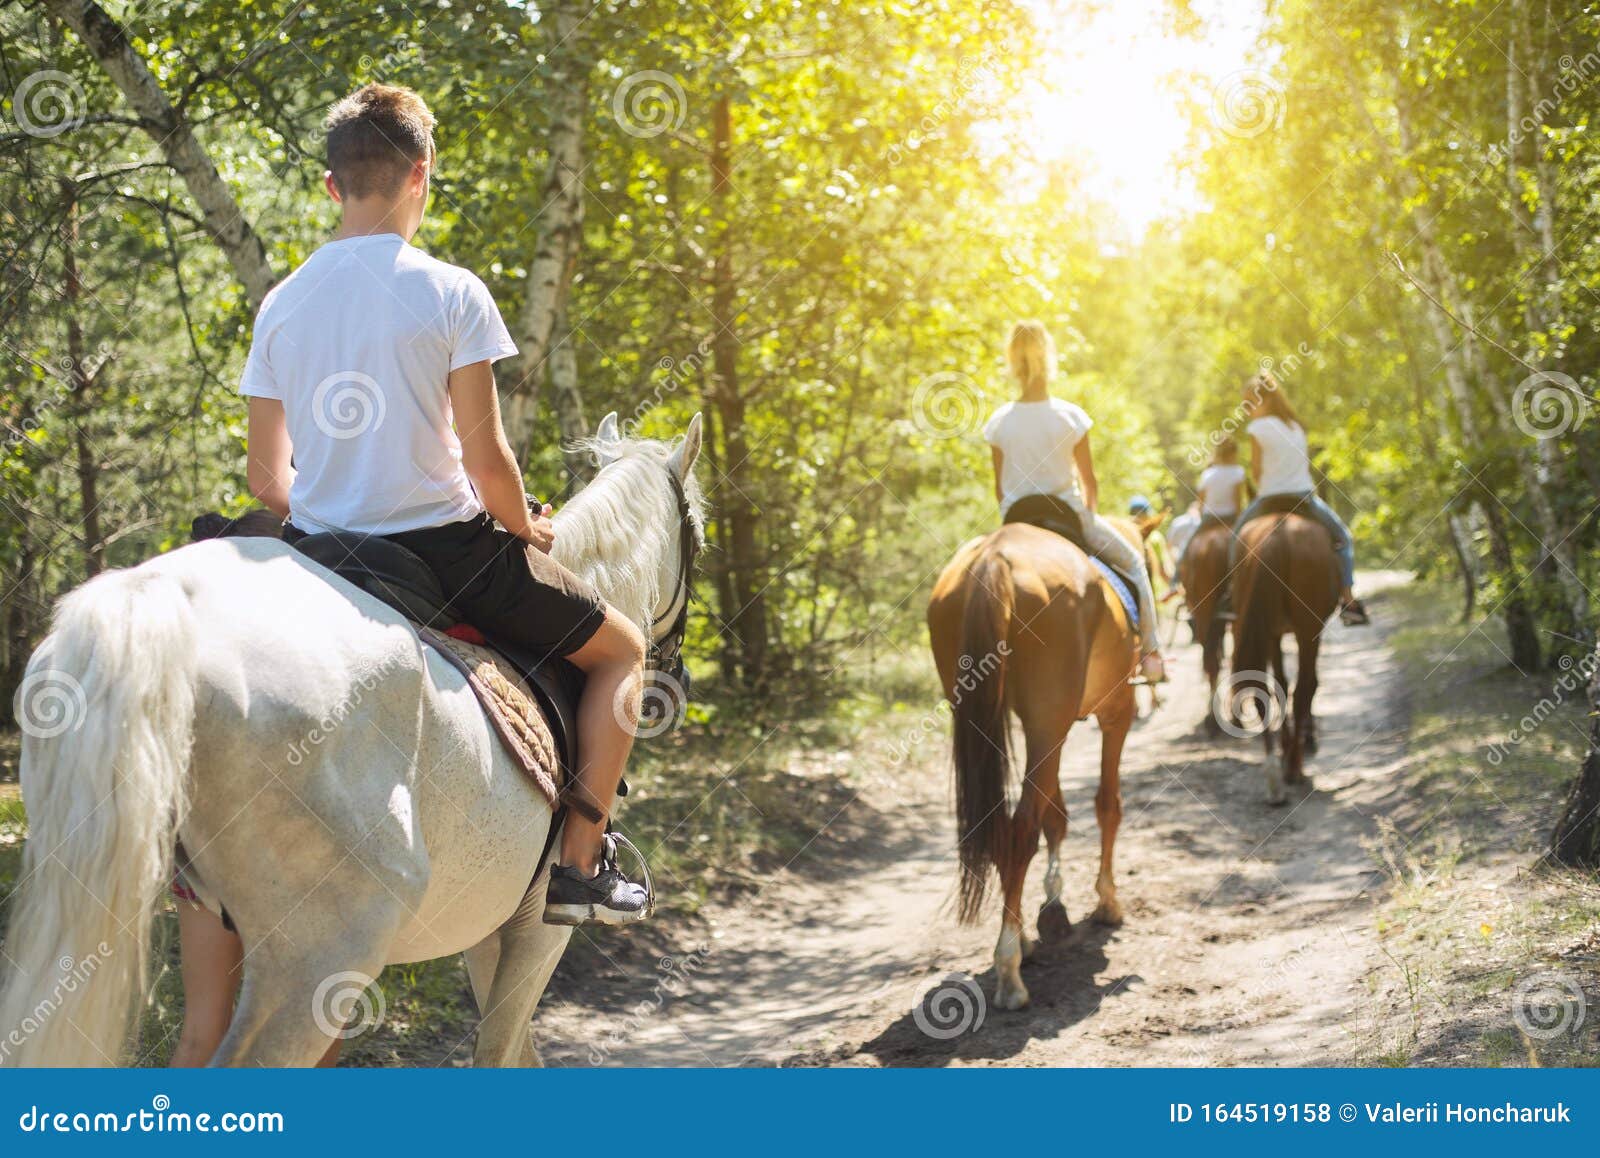 group of teenagers on horseback riding in summer park